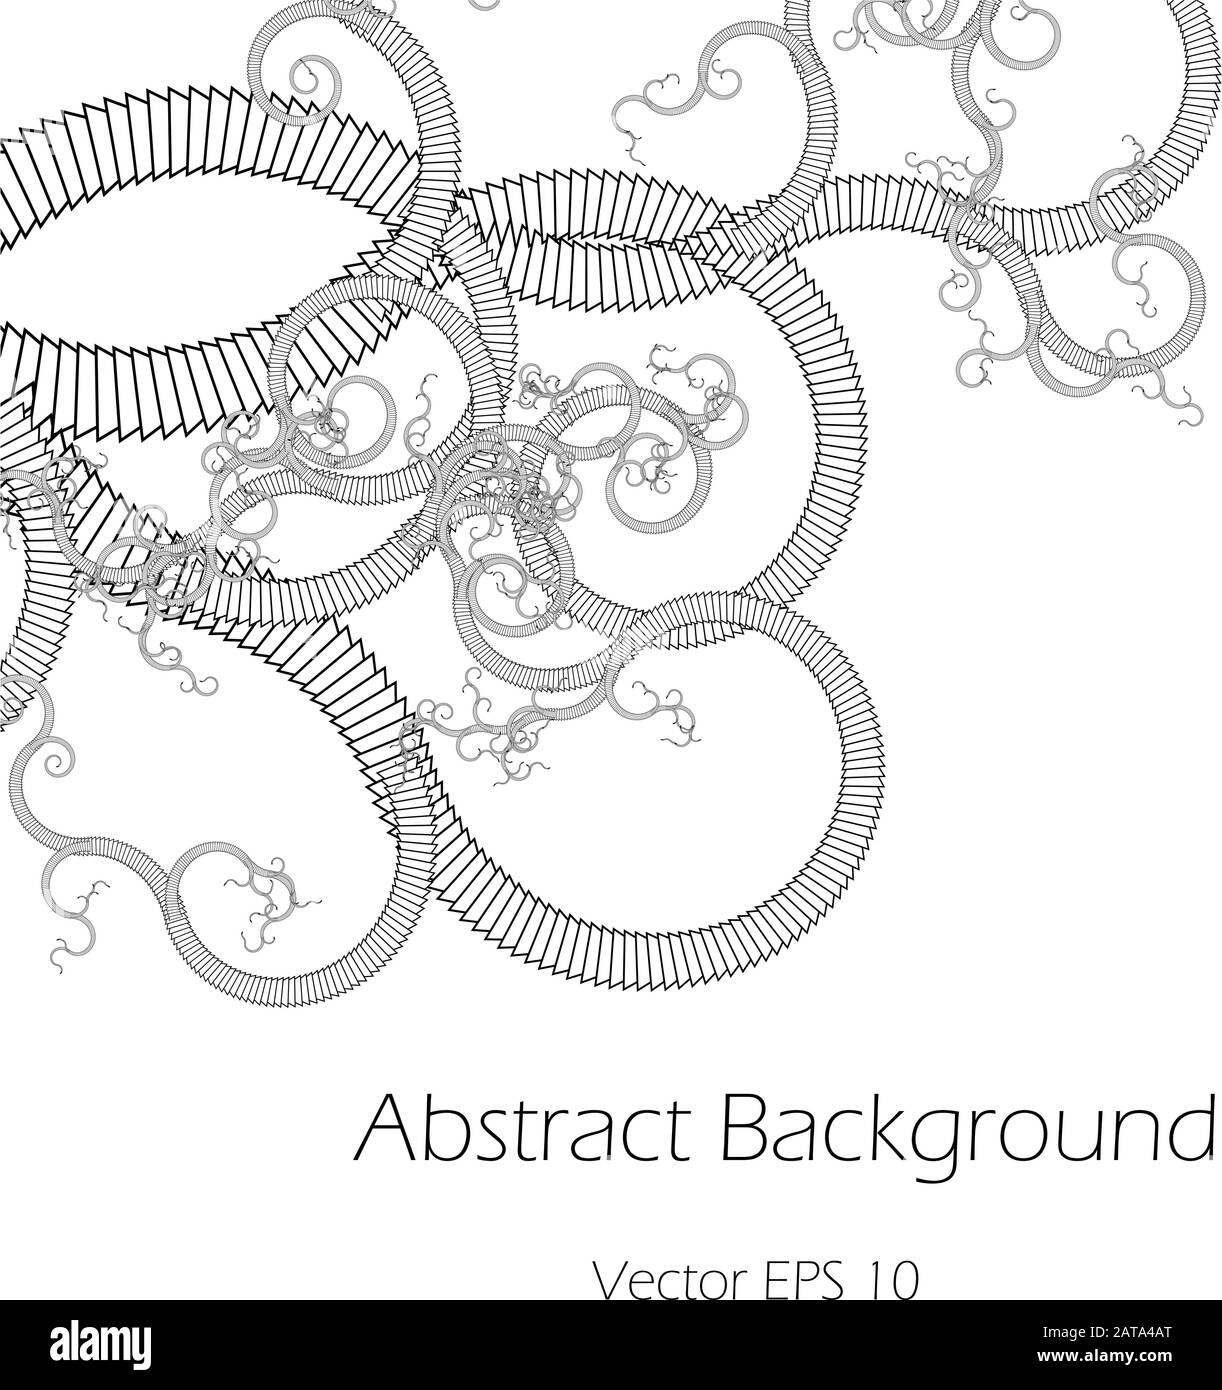 Abstract Vector Background  with Whorl Tentacles Plexus Stock Vector